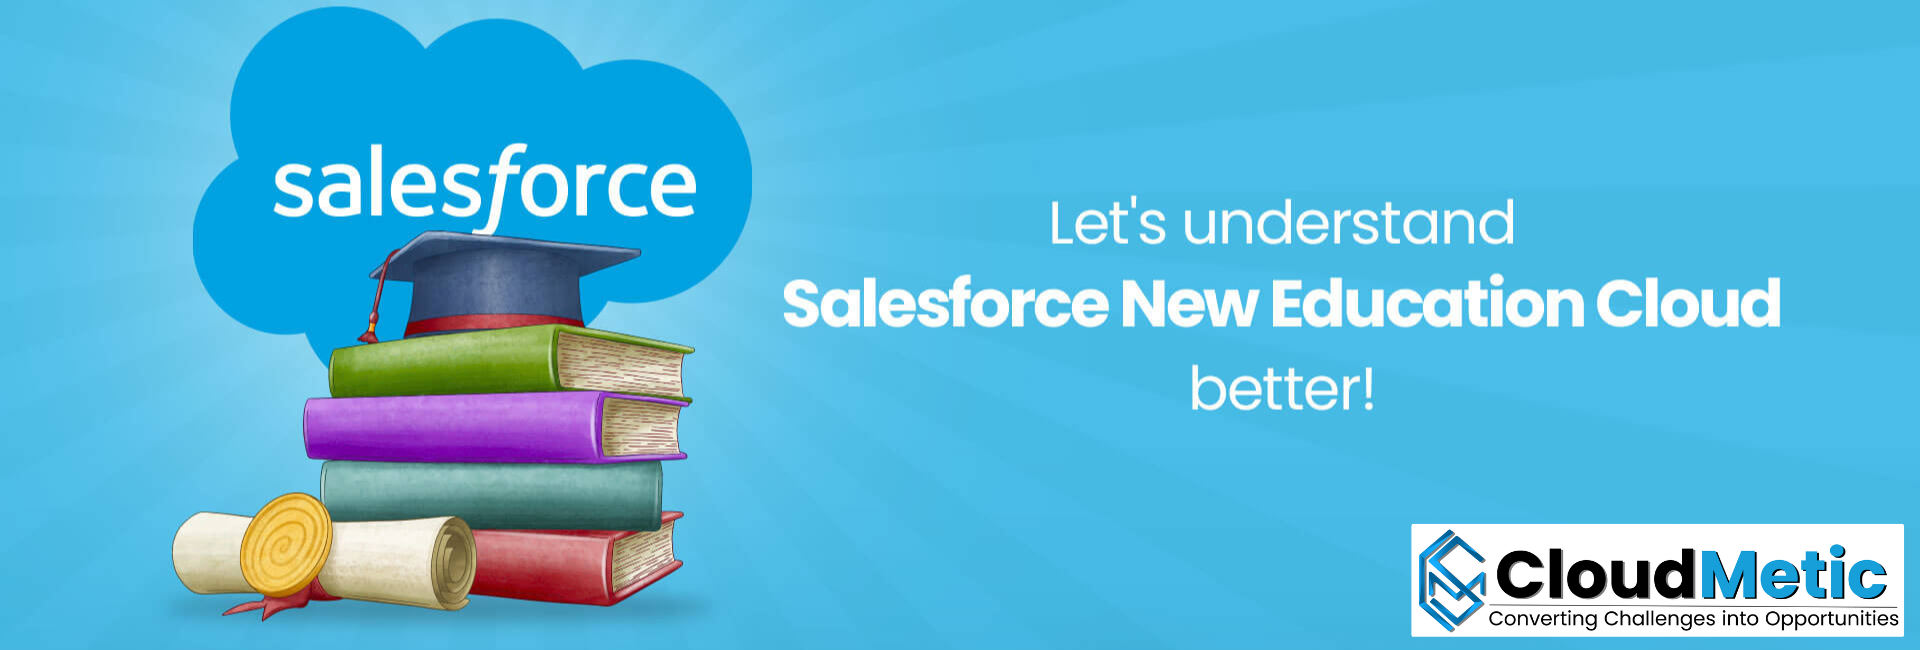 New AI-Powered Salesforce Education Cloud to Upgrade Student Growth